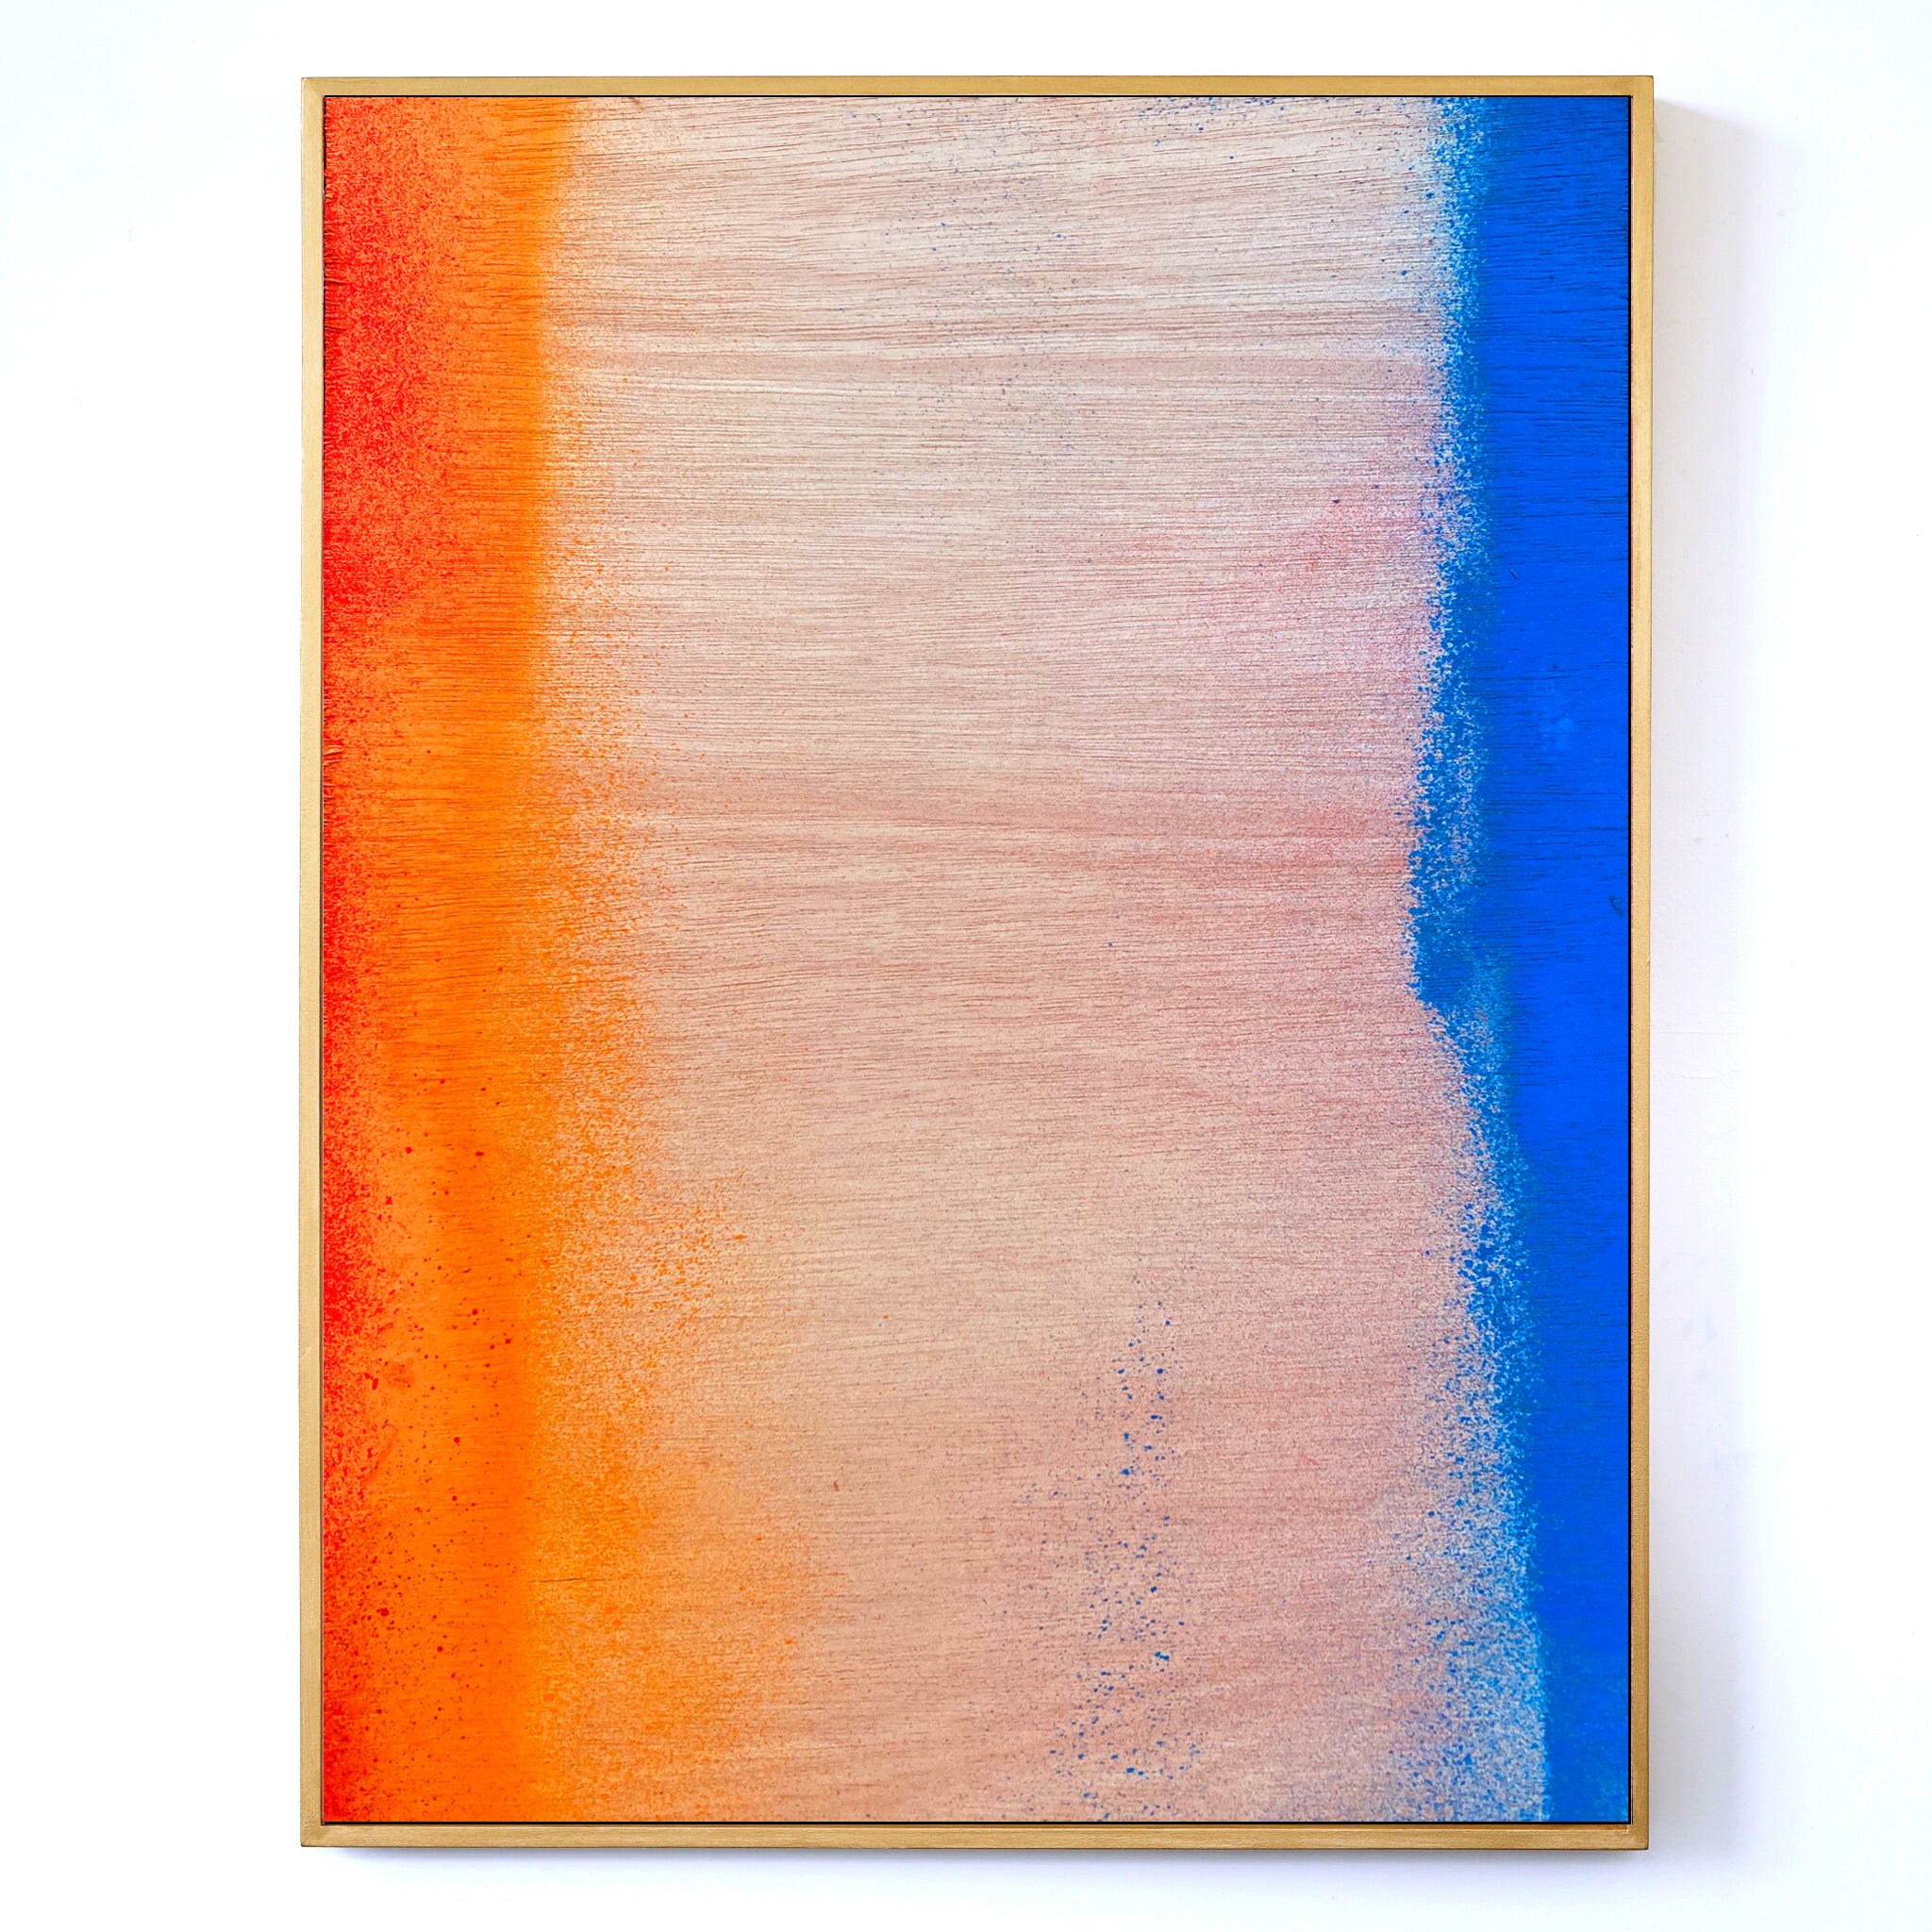 The Fall (After Rubens), spray paint on marine ply, 40 cm x 50 cm, 2022/3